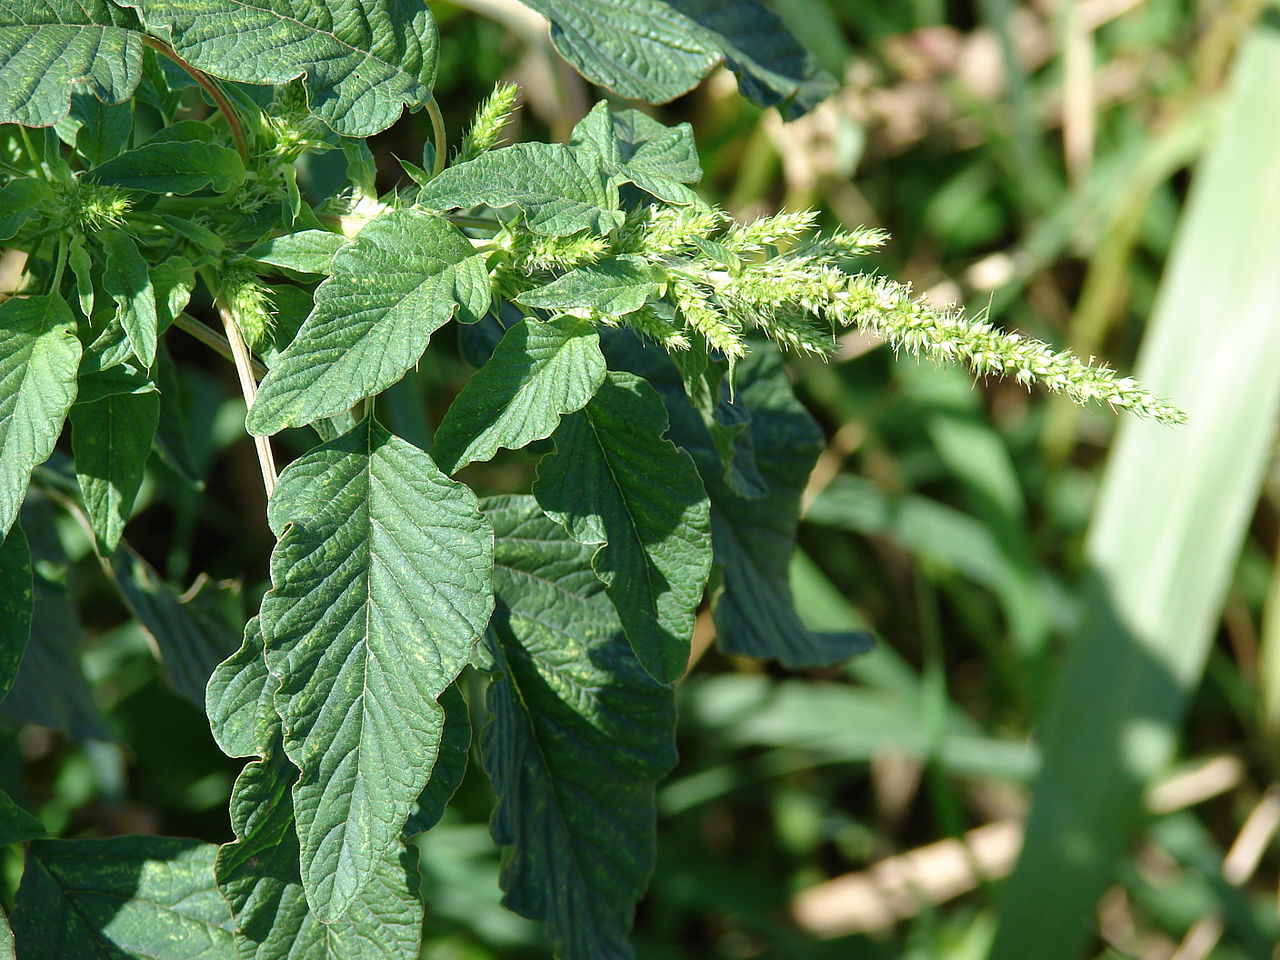 AMARANTH opens up a new direction for the treatment of hemorrhoids